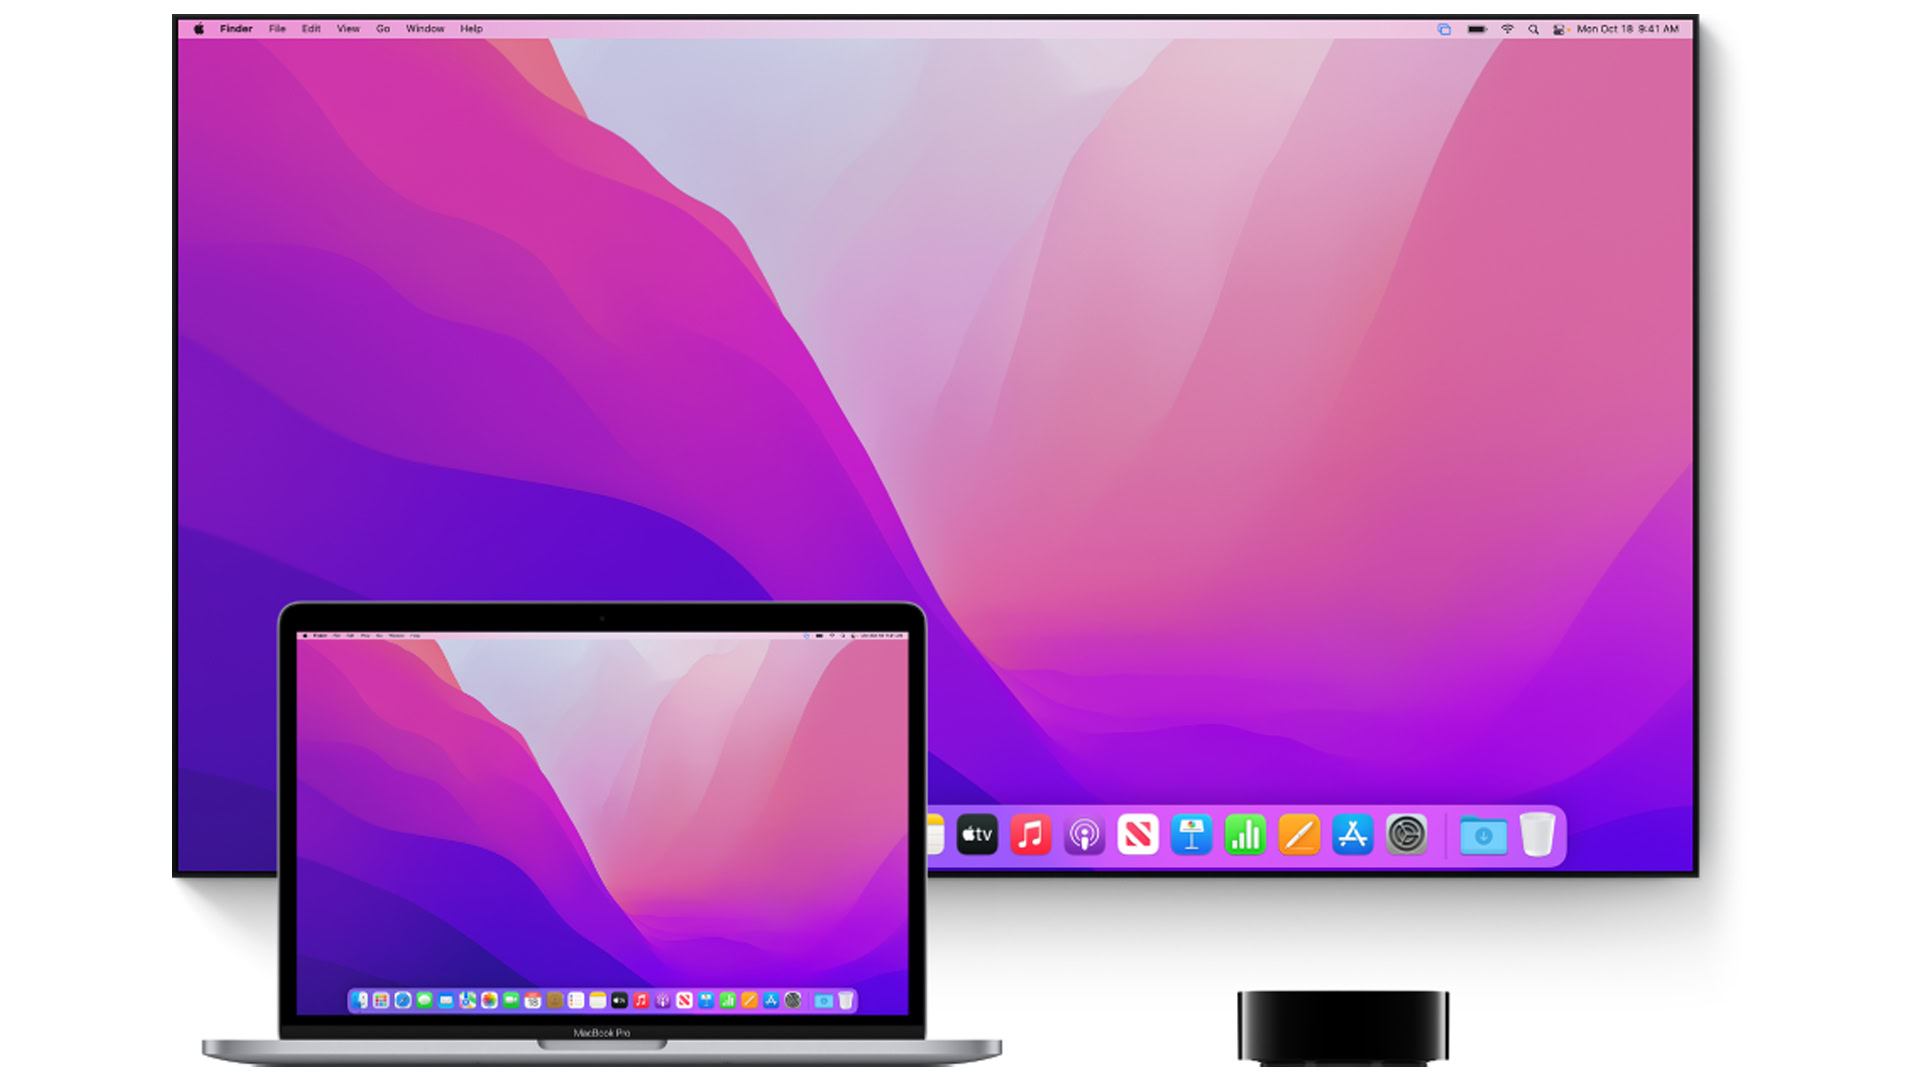 AirPlay mirroring from a Mac